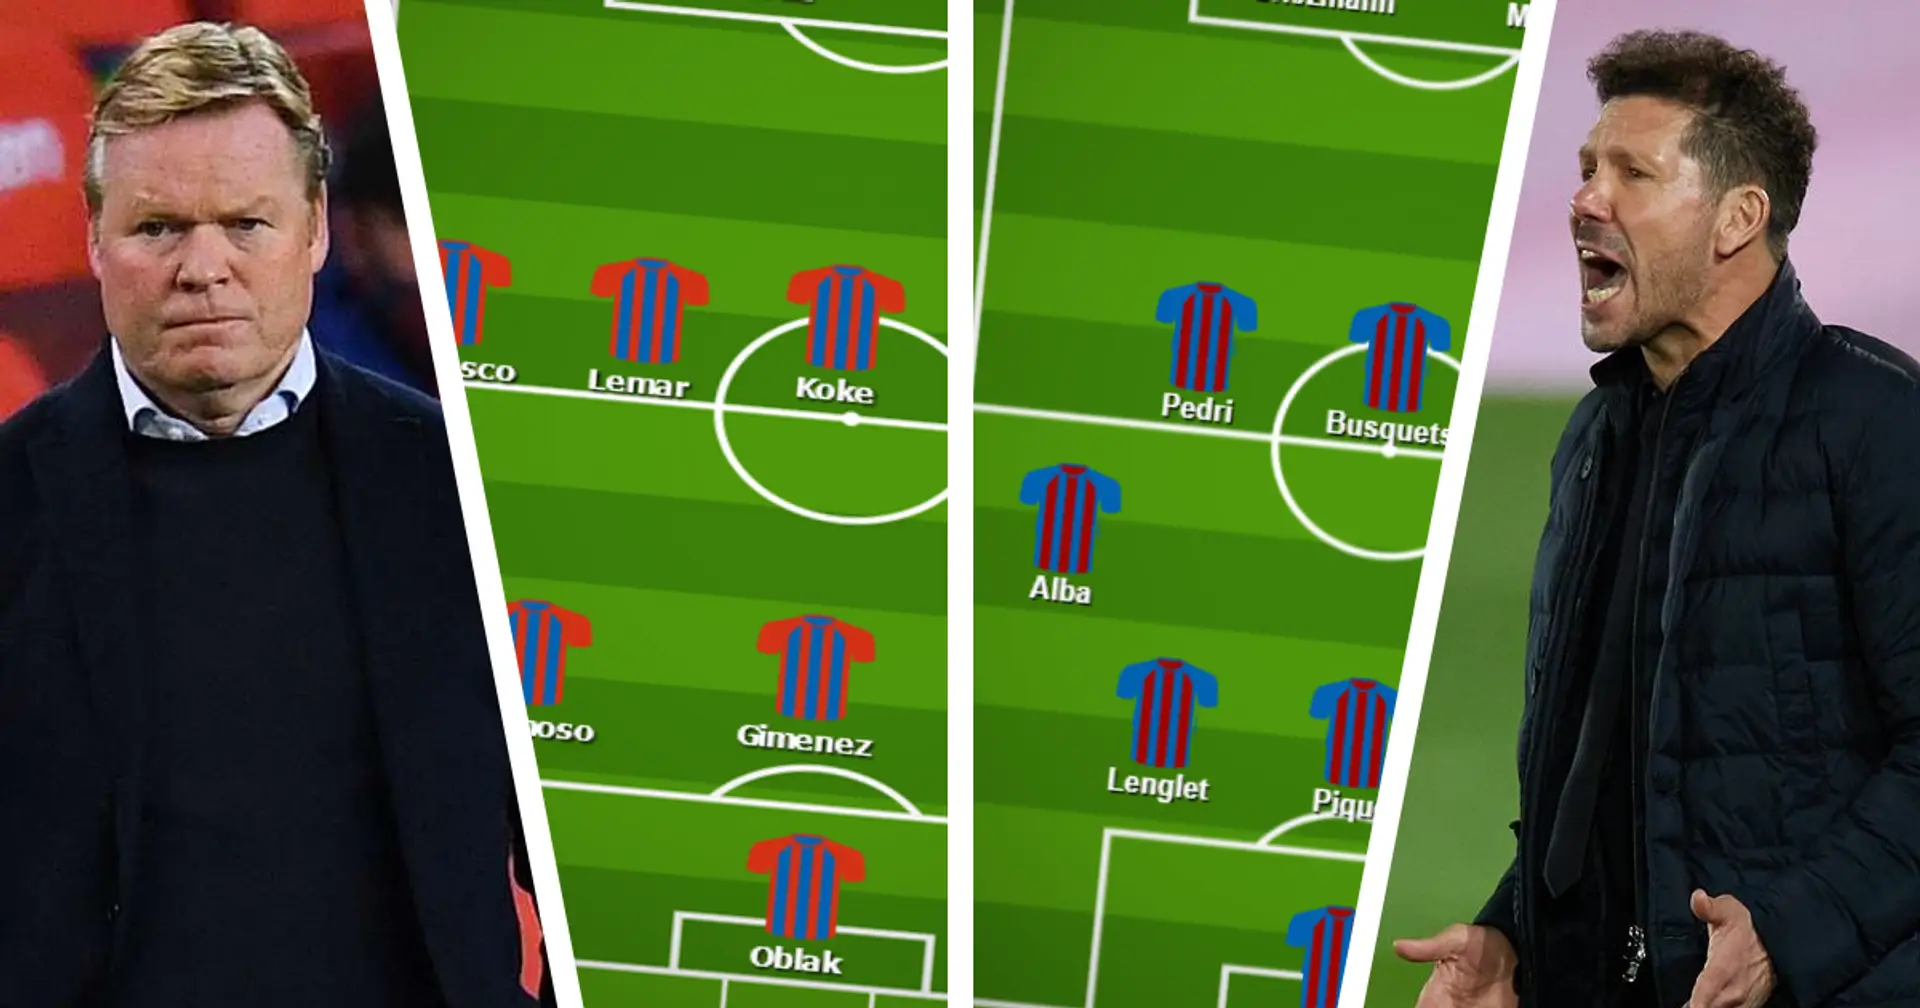 Barcelona vs Atleti likely XI: Where will the game be won and lost?